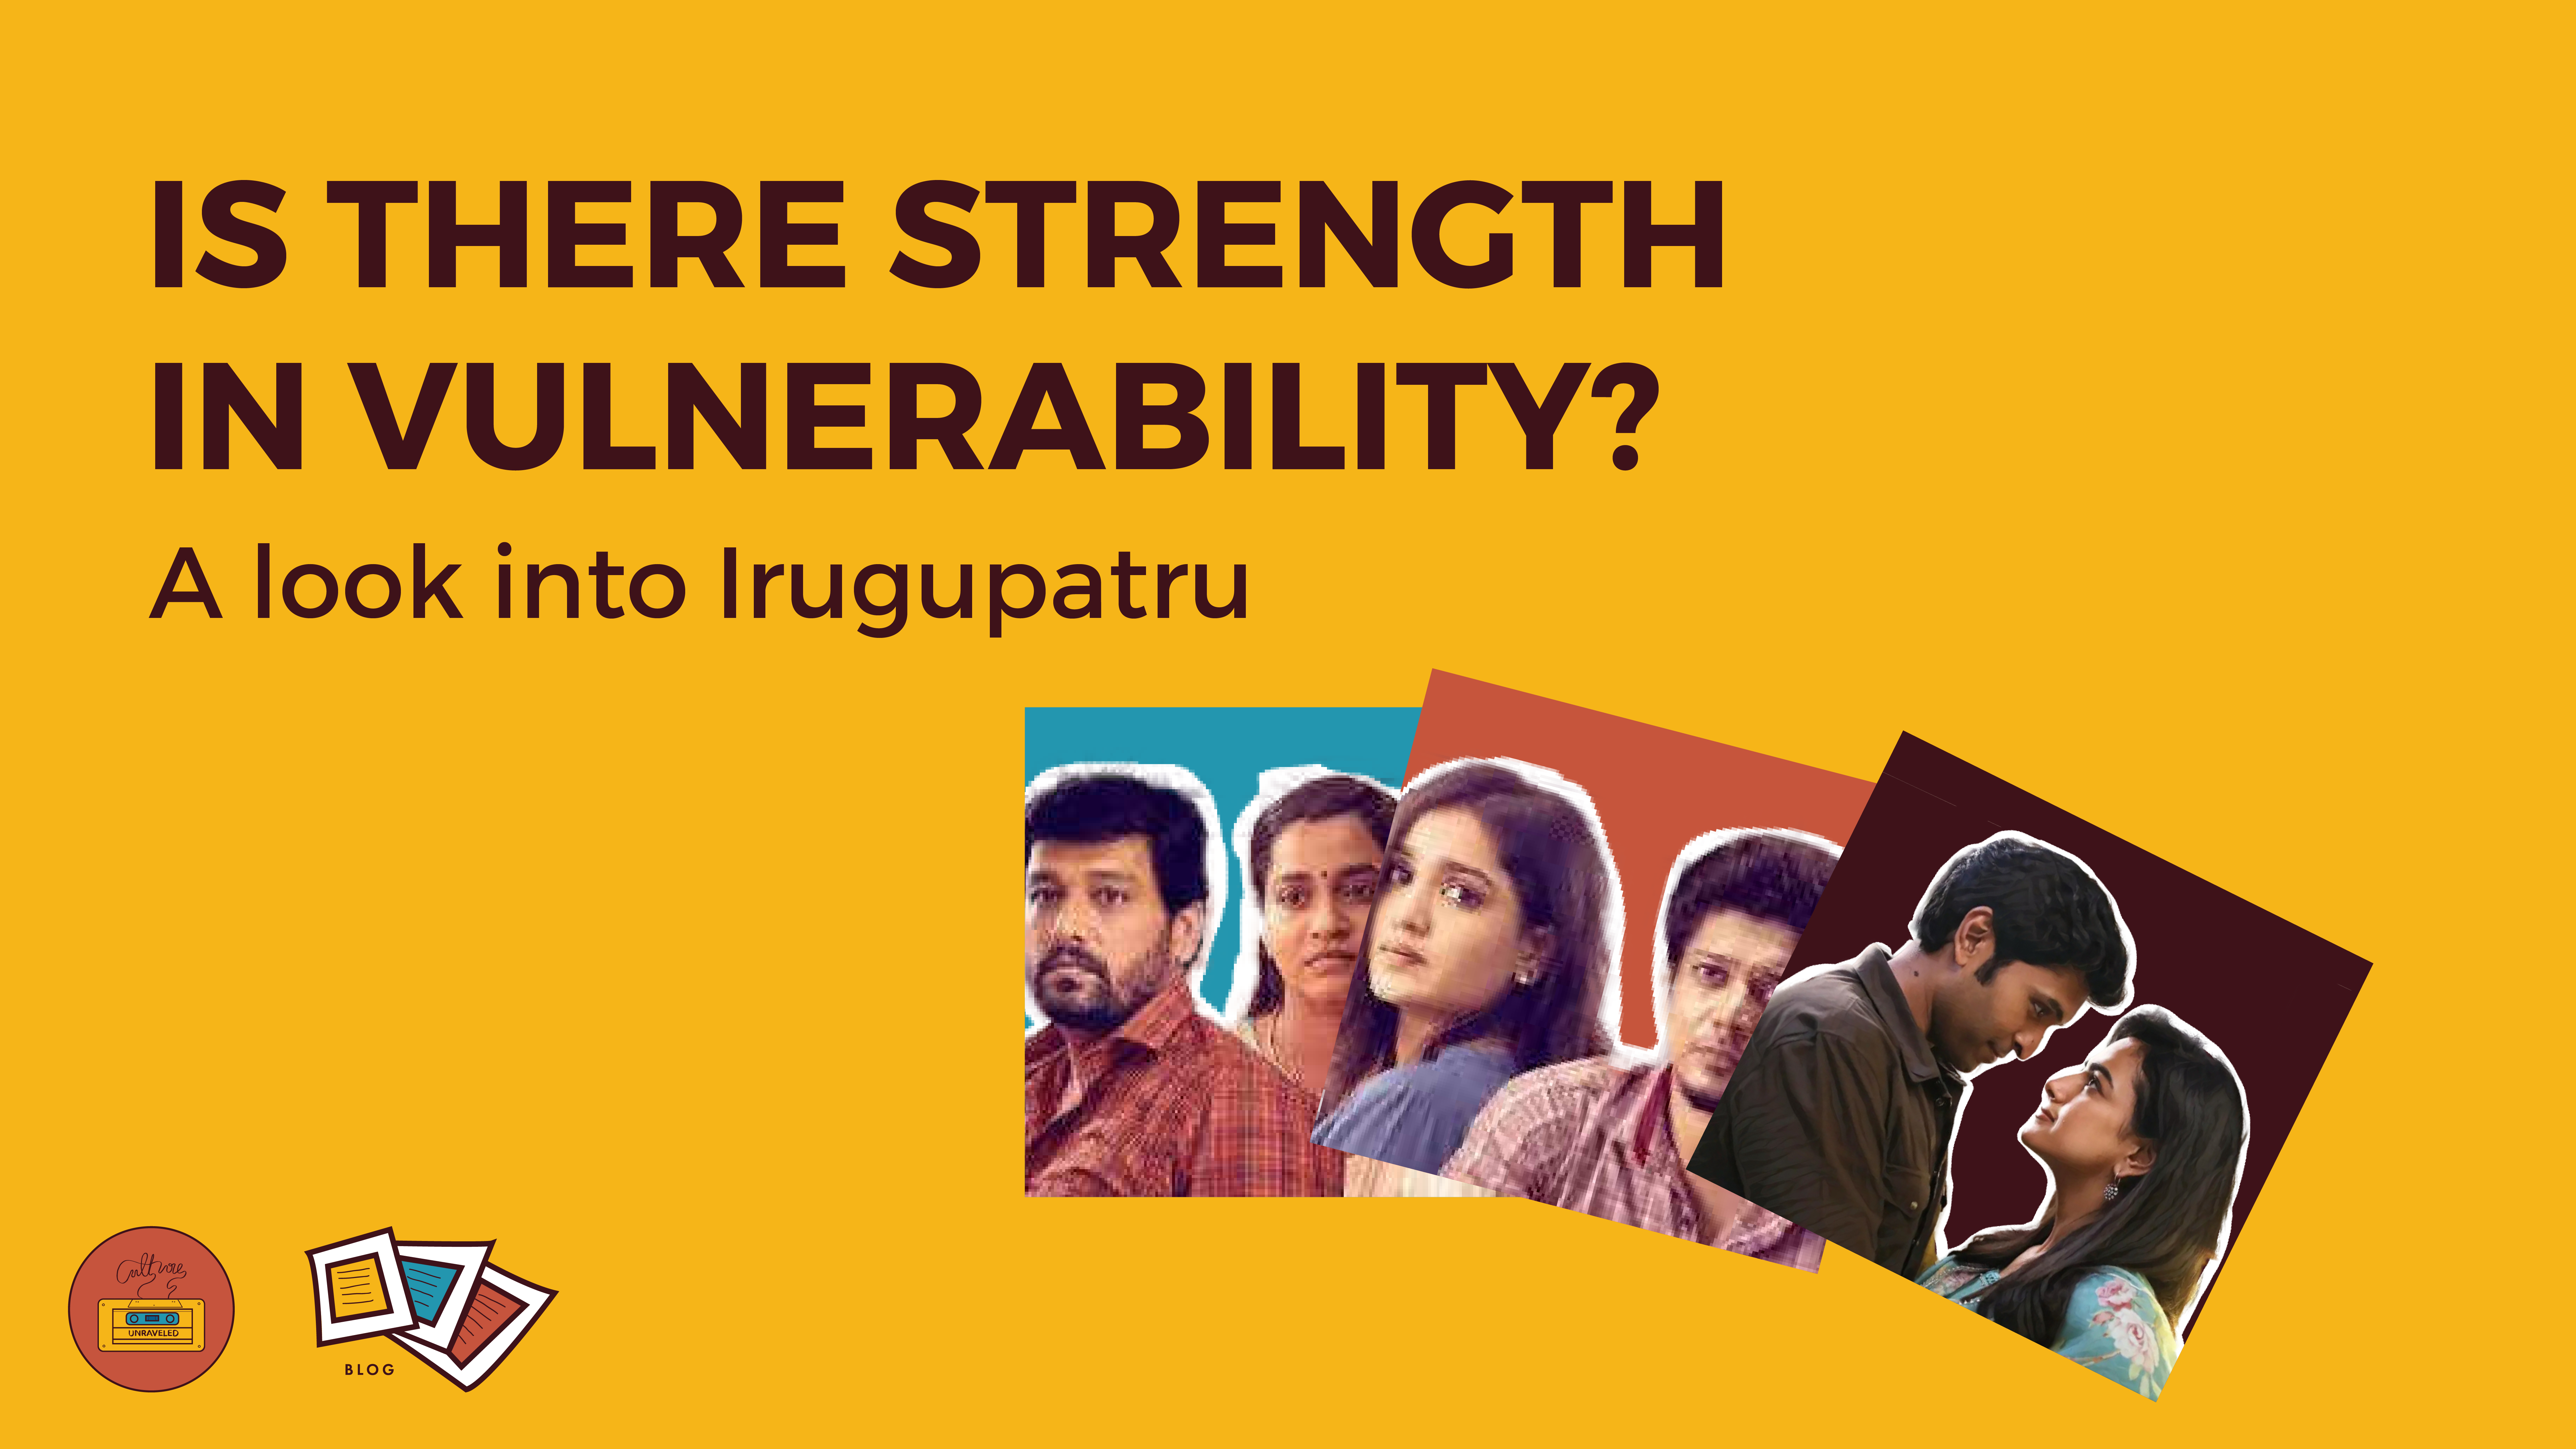 Is there strength in vulnerability? A look into Irugupatru